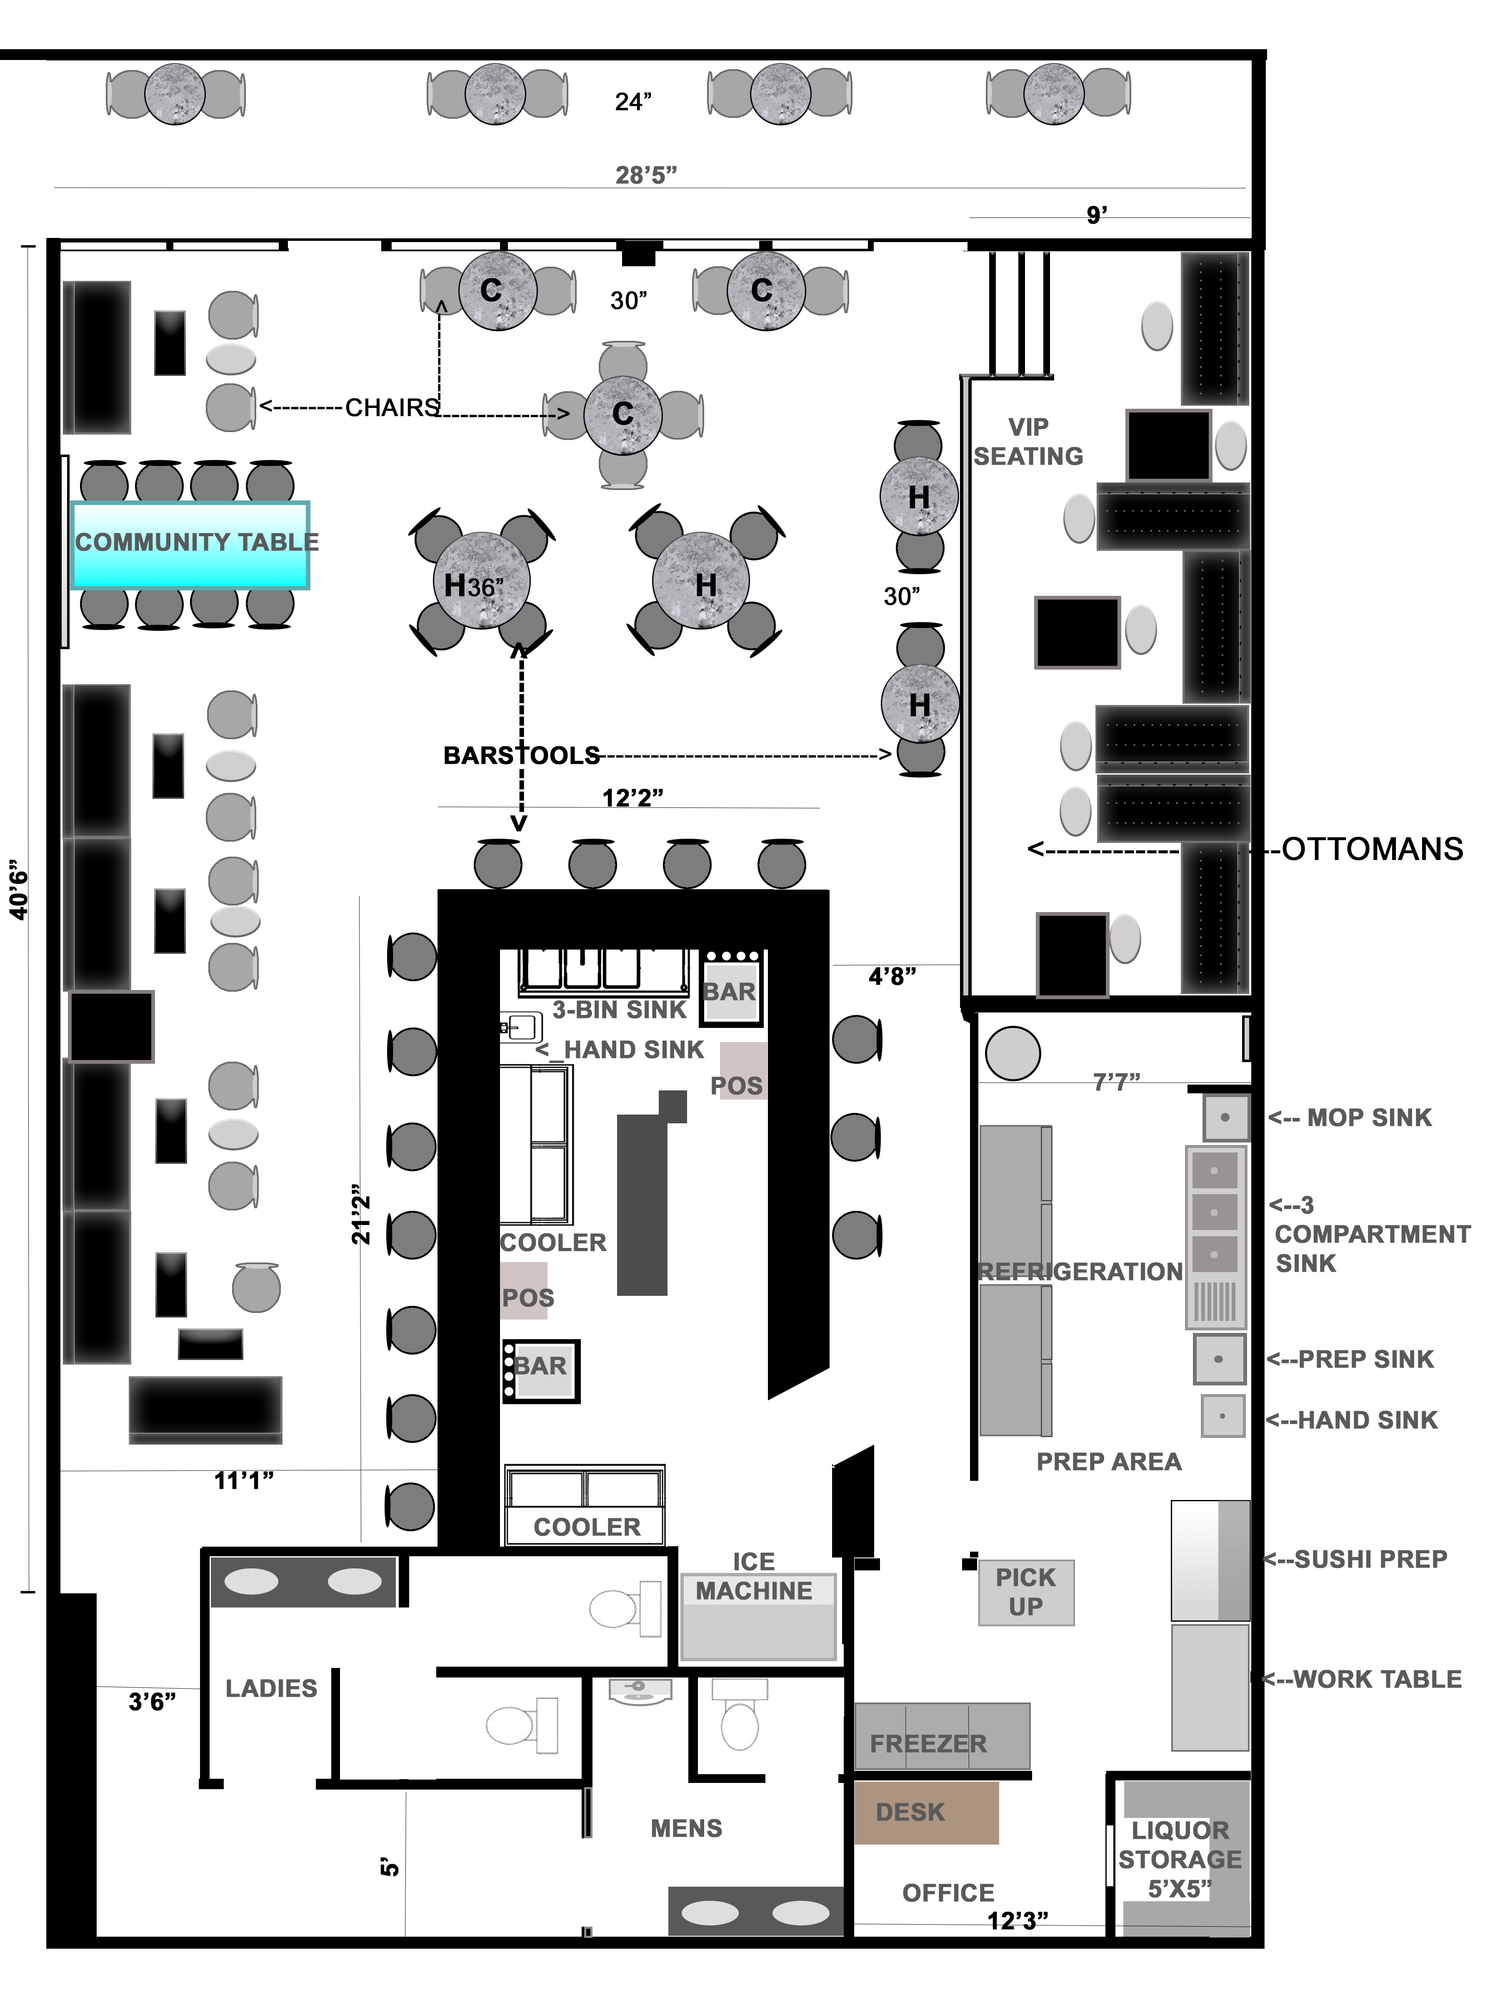 9 Restaurant Floor Plan Examples & Ideas for Your